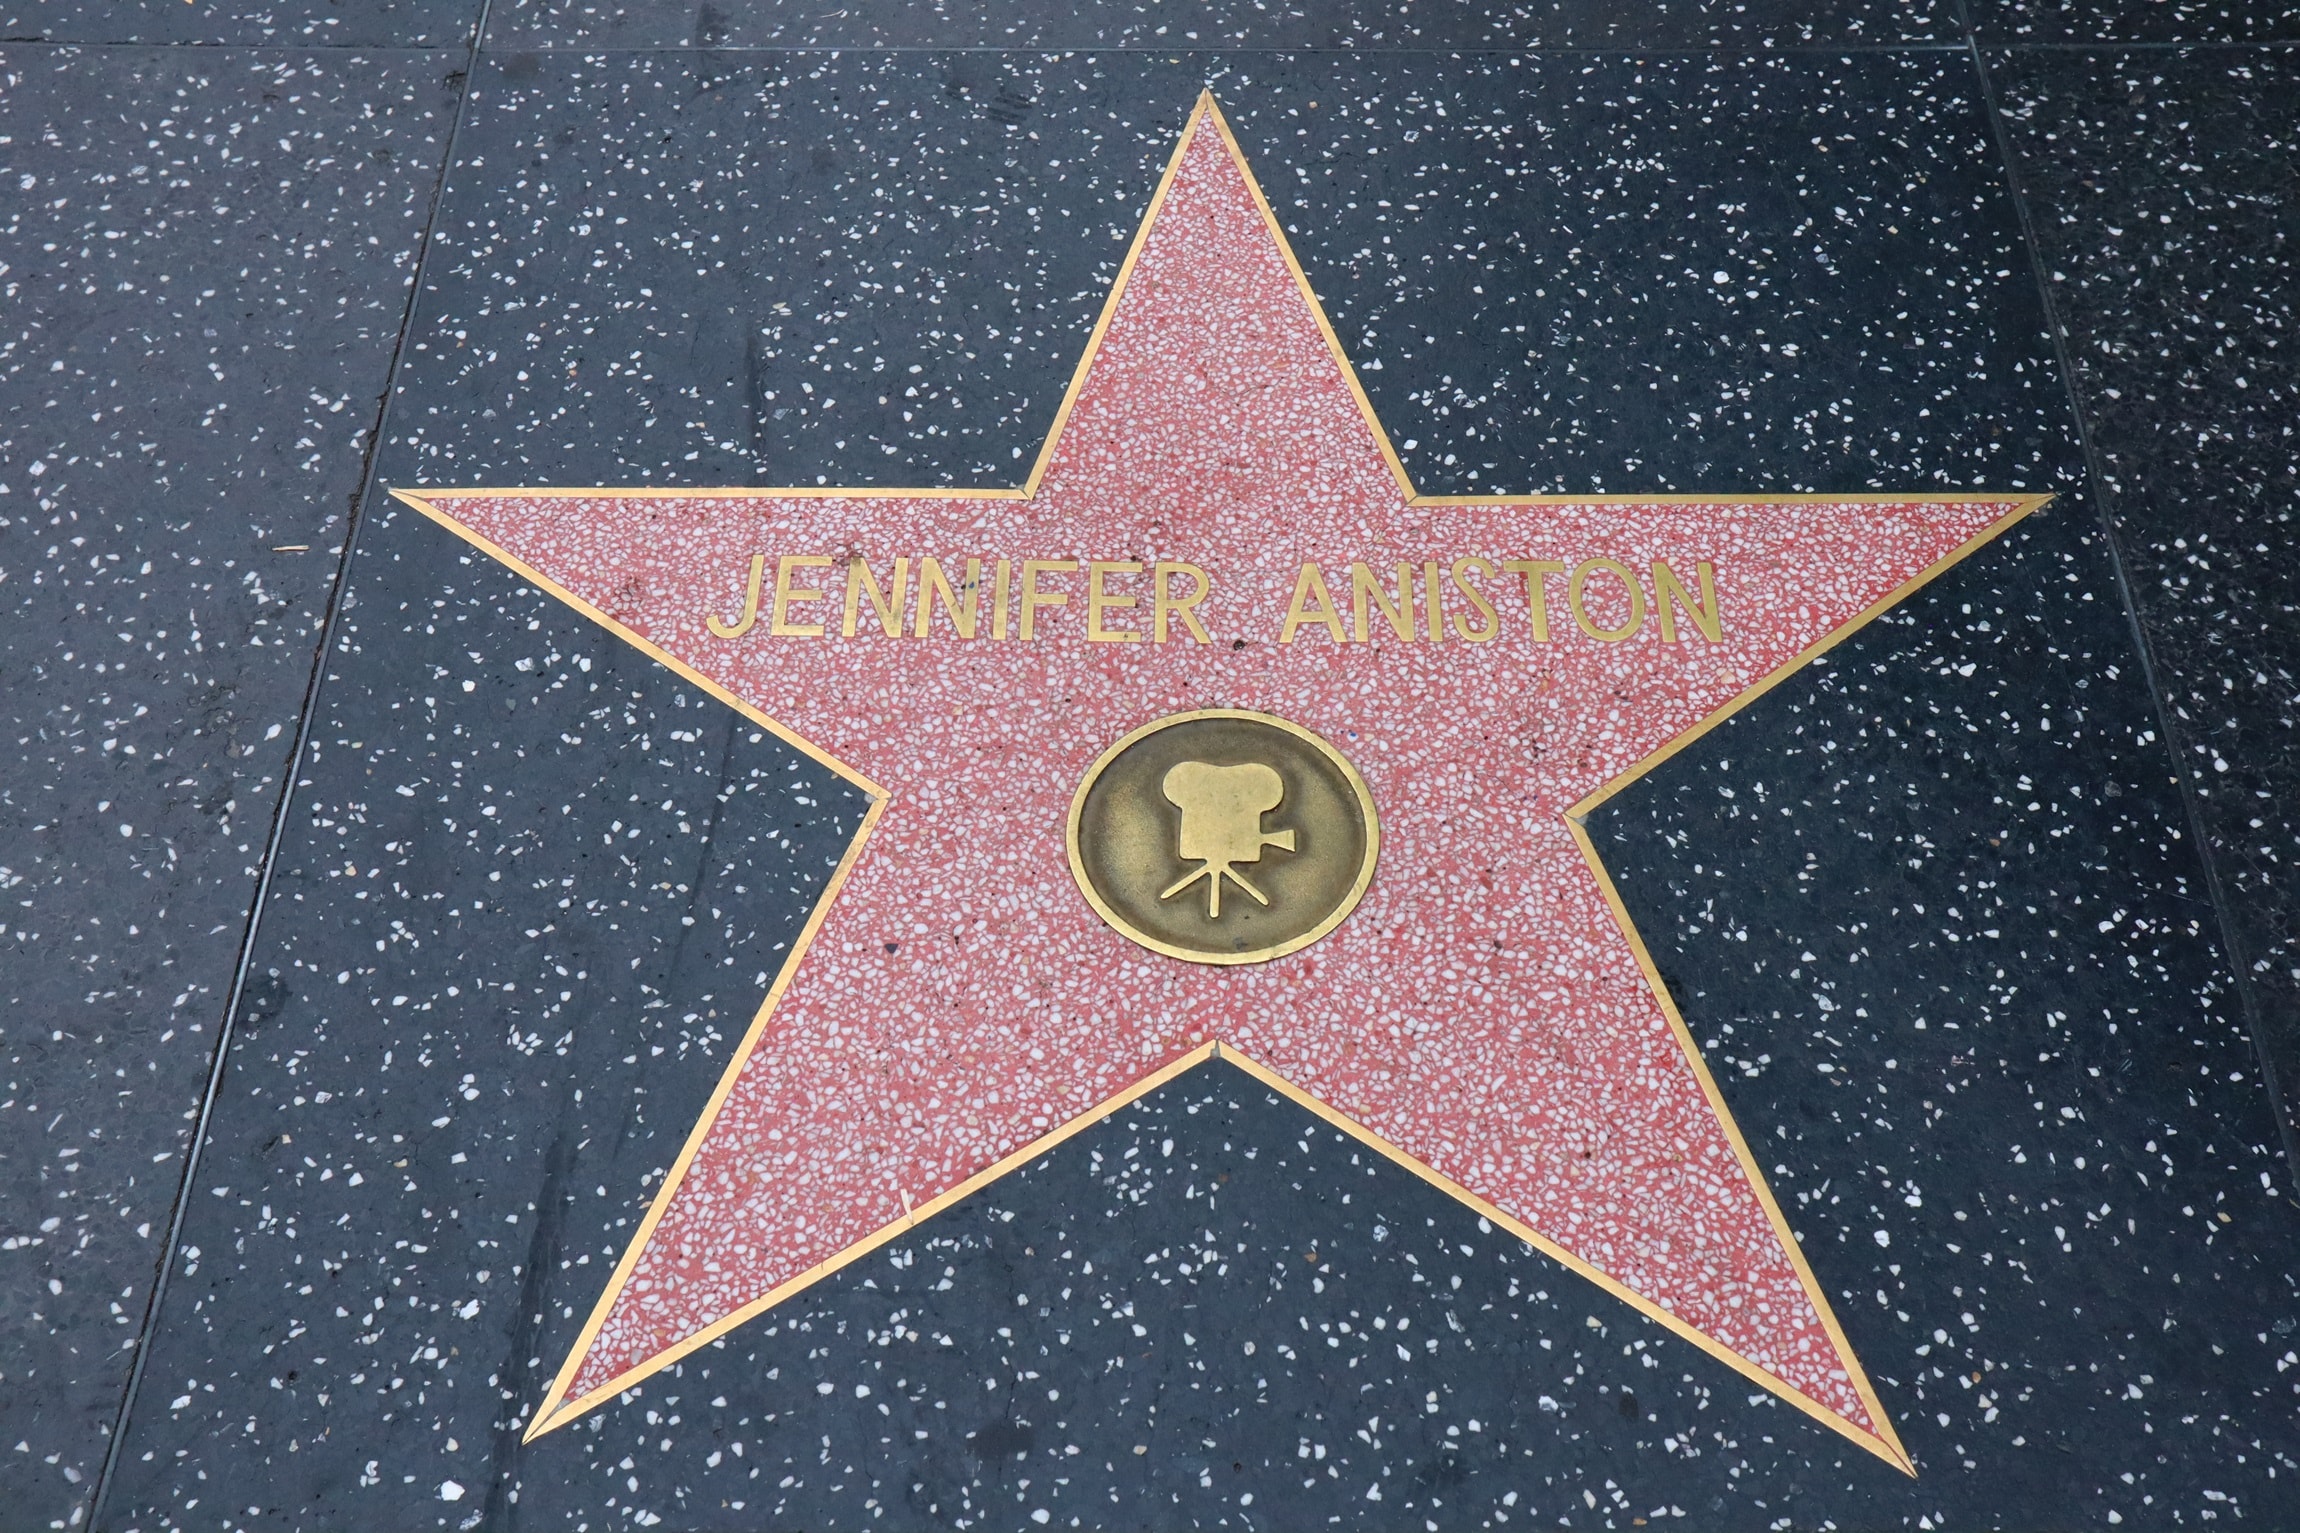 Jennifer Aniston has a star on the Hollywood Walk of Fame located at 6270 Hollywood Boulevard in front of the W Hollywood Hotel at the famous corner of Hollywood and Vine